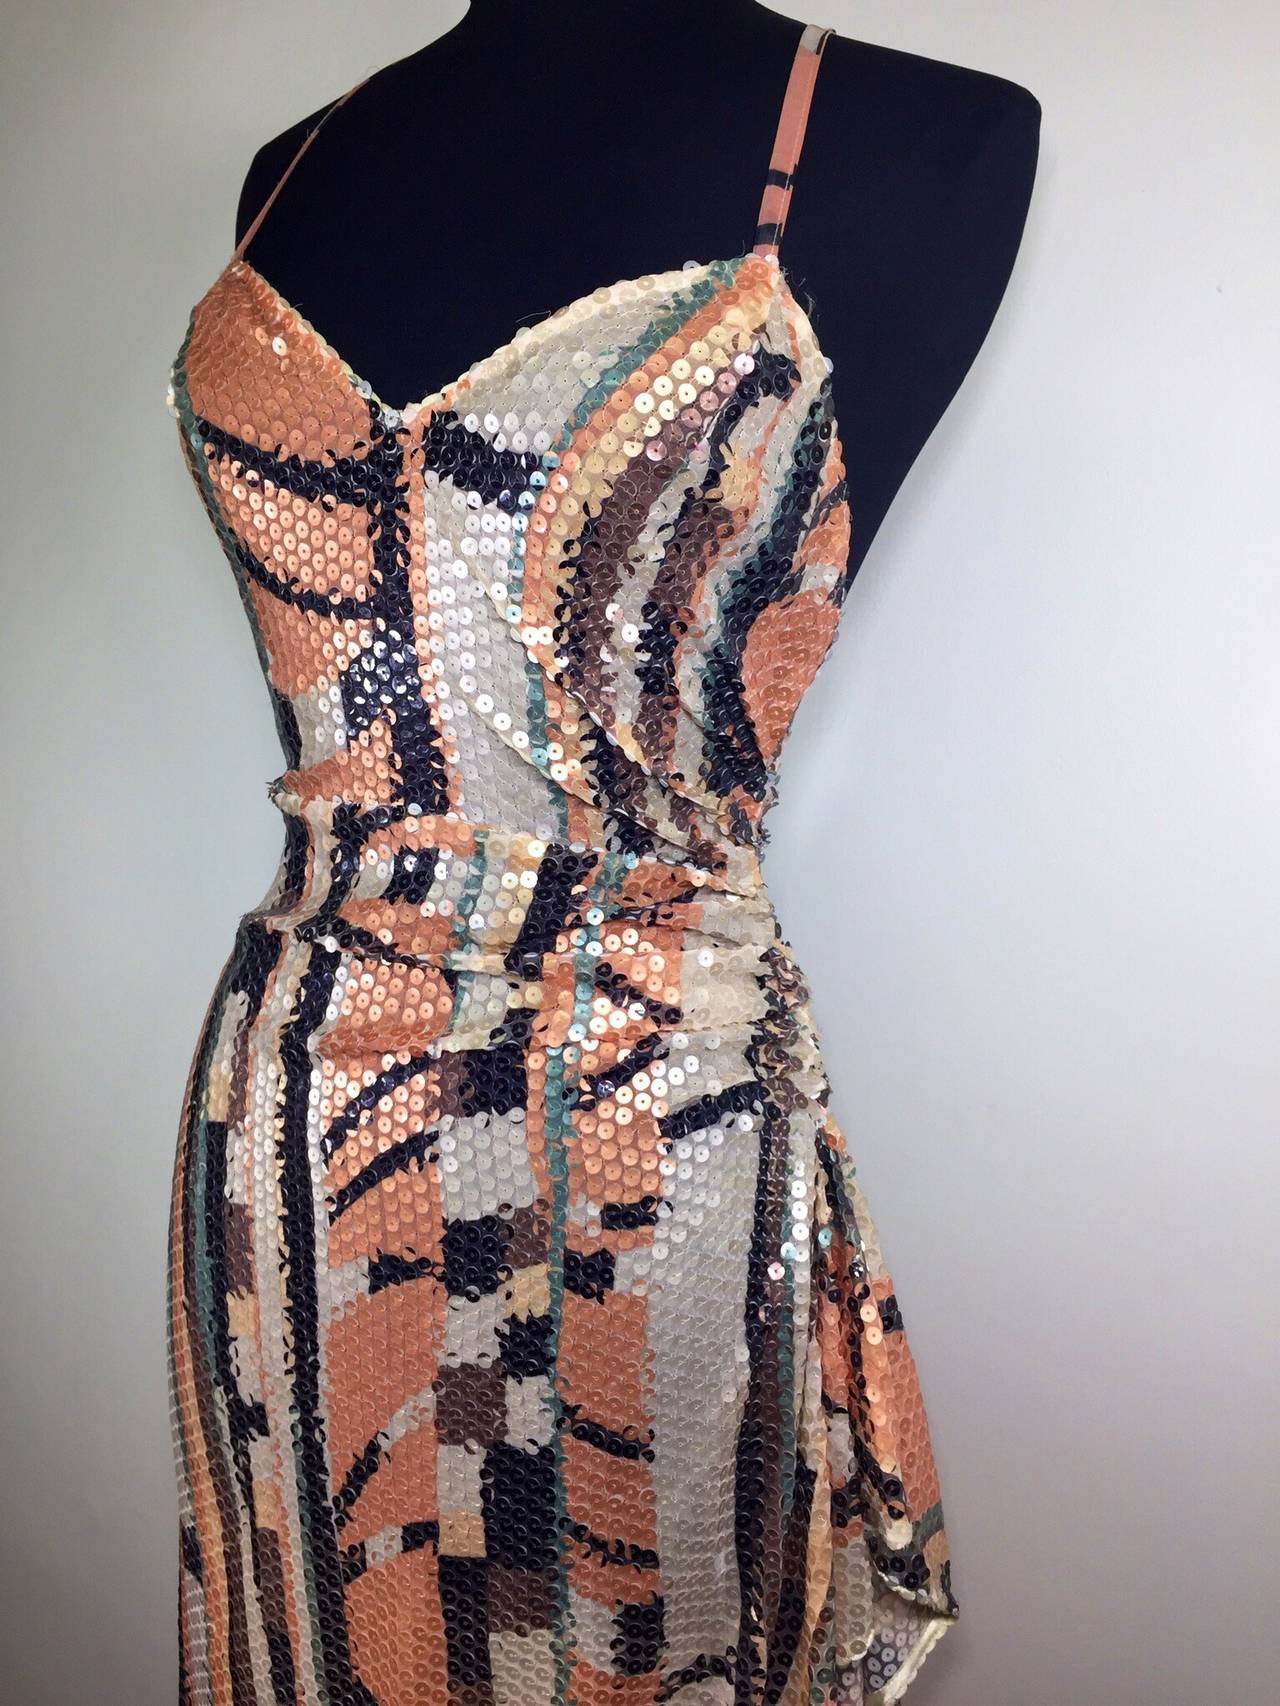 70s style party dress